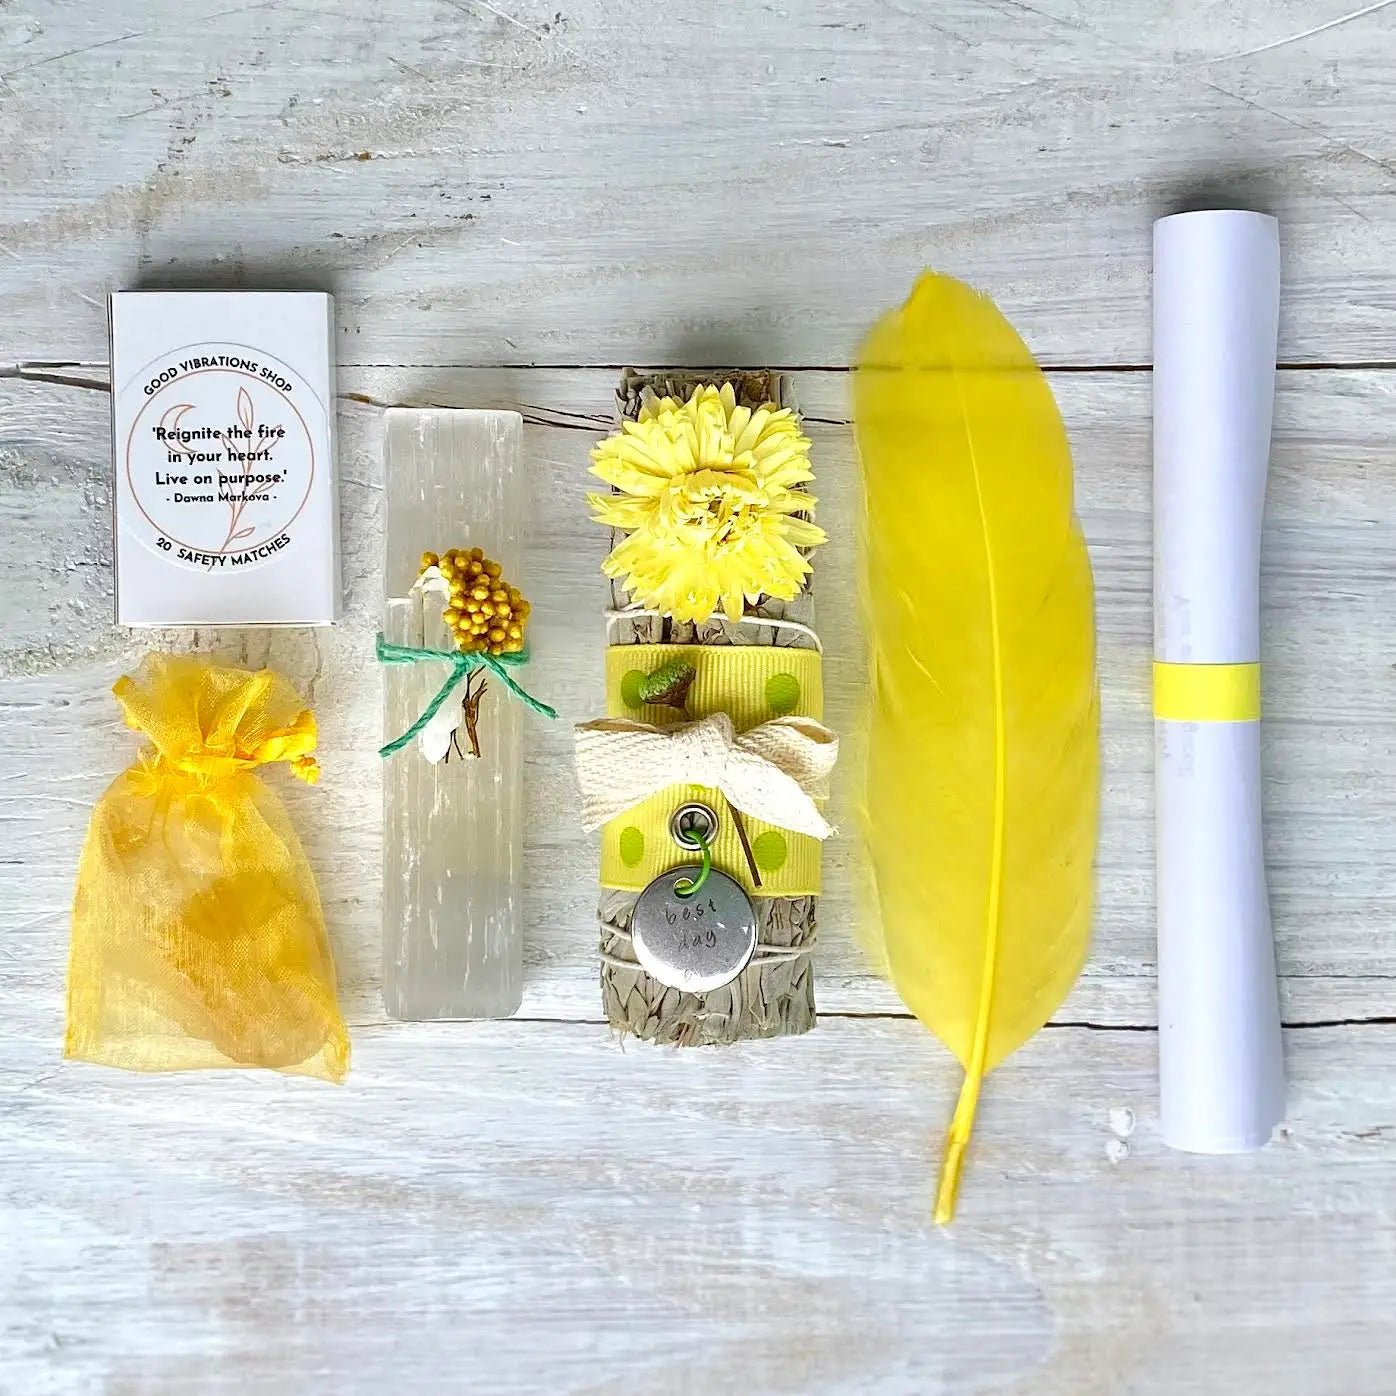 Anything Is Possible⎮Abundance Ritual Kit - Mindful Living Home